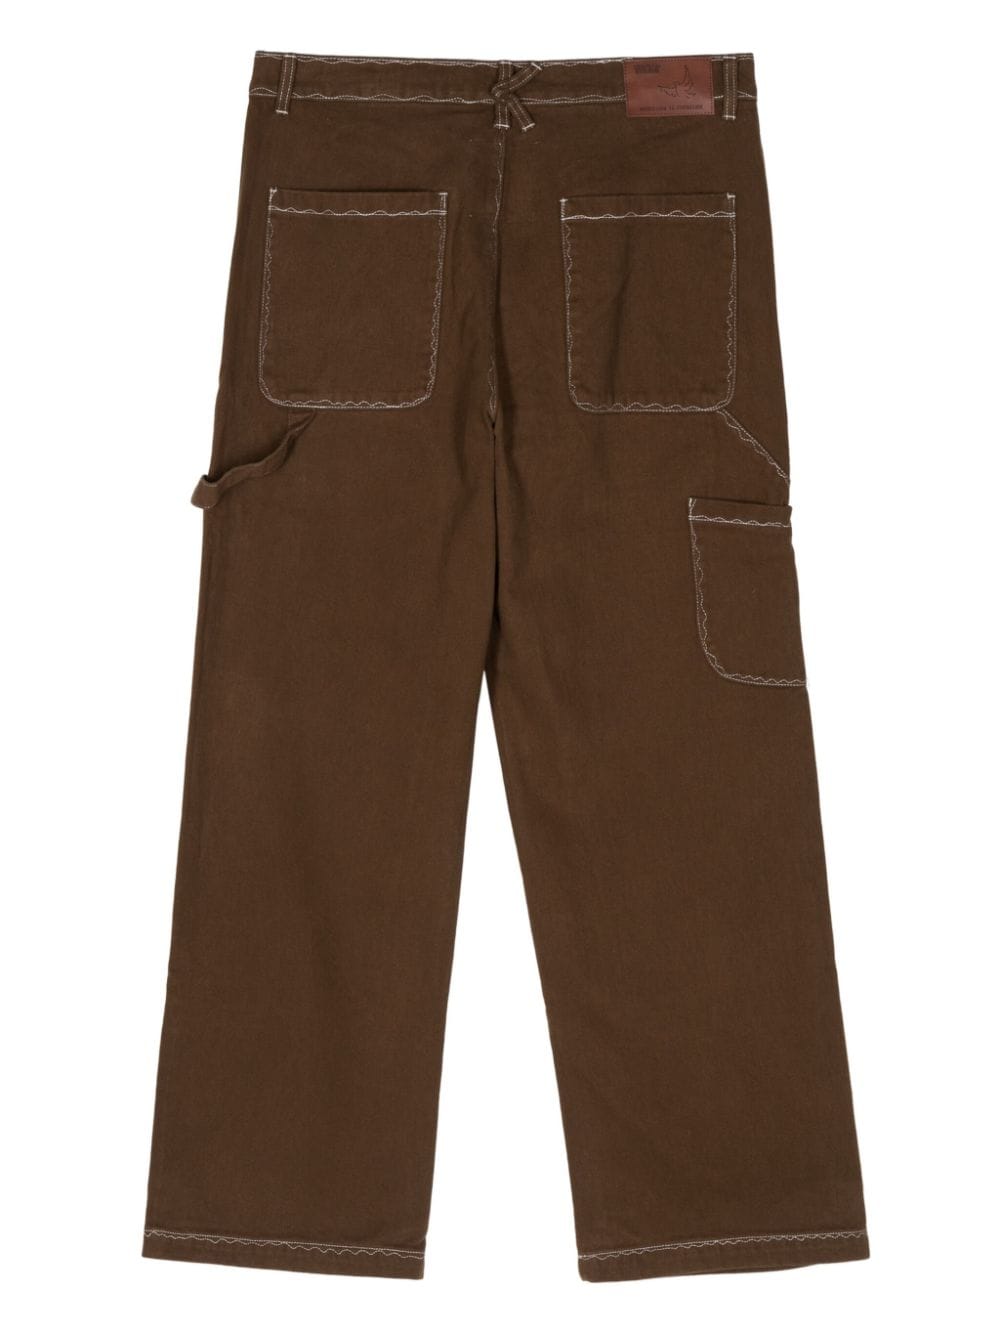 KidSuper Messy Stitched work-style trousers - Bruin